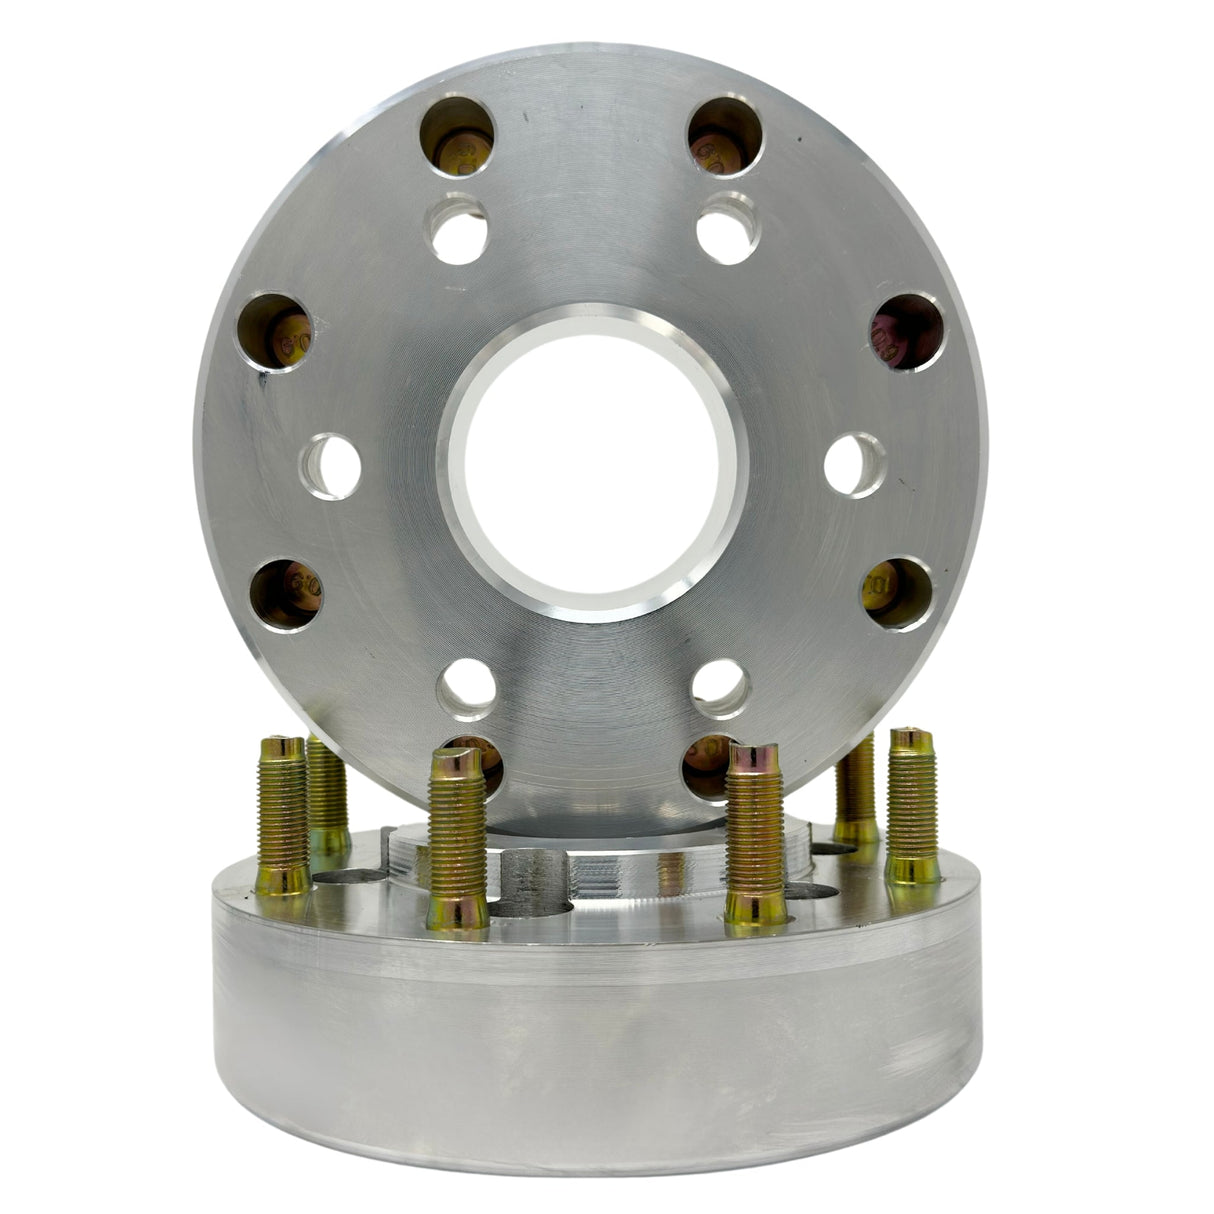 Chevy GMC 6x5.5 To 8x210 Hubcentric Wheel Adapters For Silverado, Sierra, Tahoe 6x139.7 To 8x210 | 78.1mm To 154.2mm Centerbore | 14x1.5 Studs 1" Inch - 2" Inch Thicknesses Also Fits Yukon, Escalade + More MADE IN THE USA